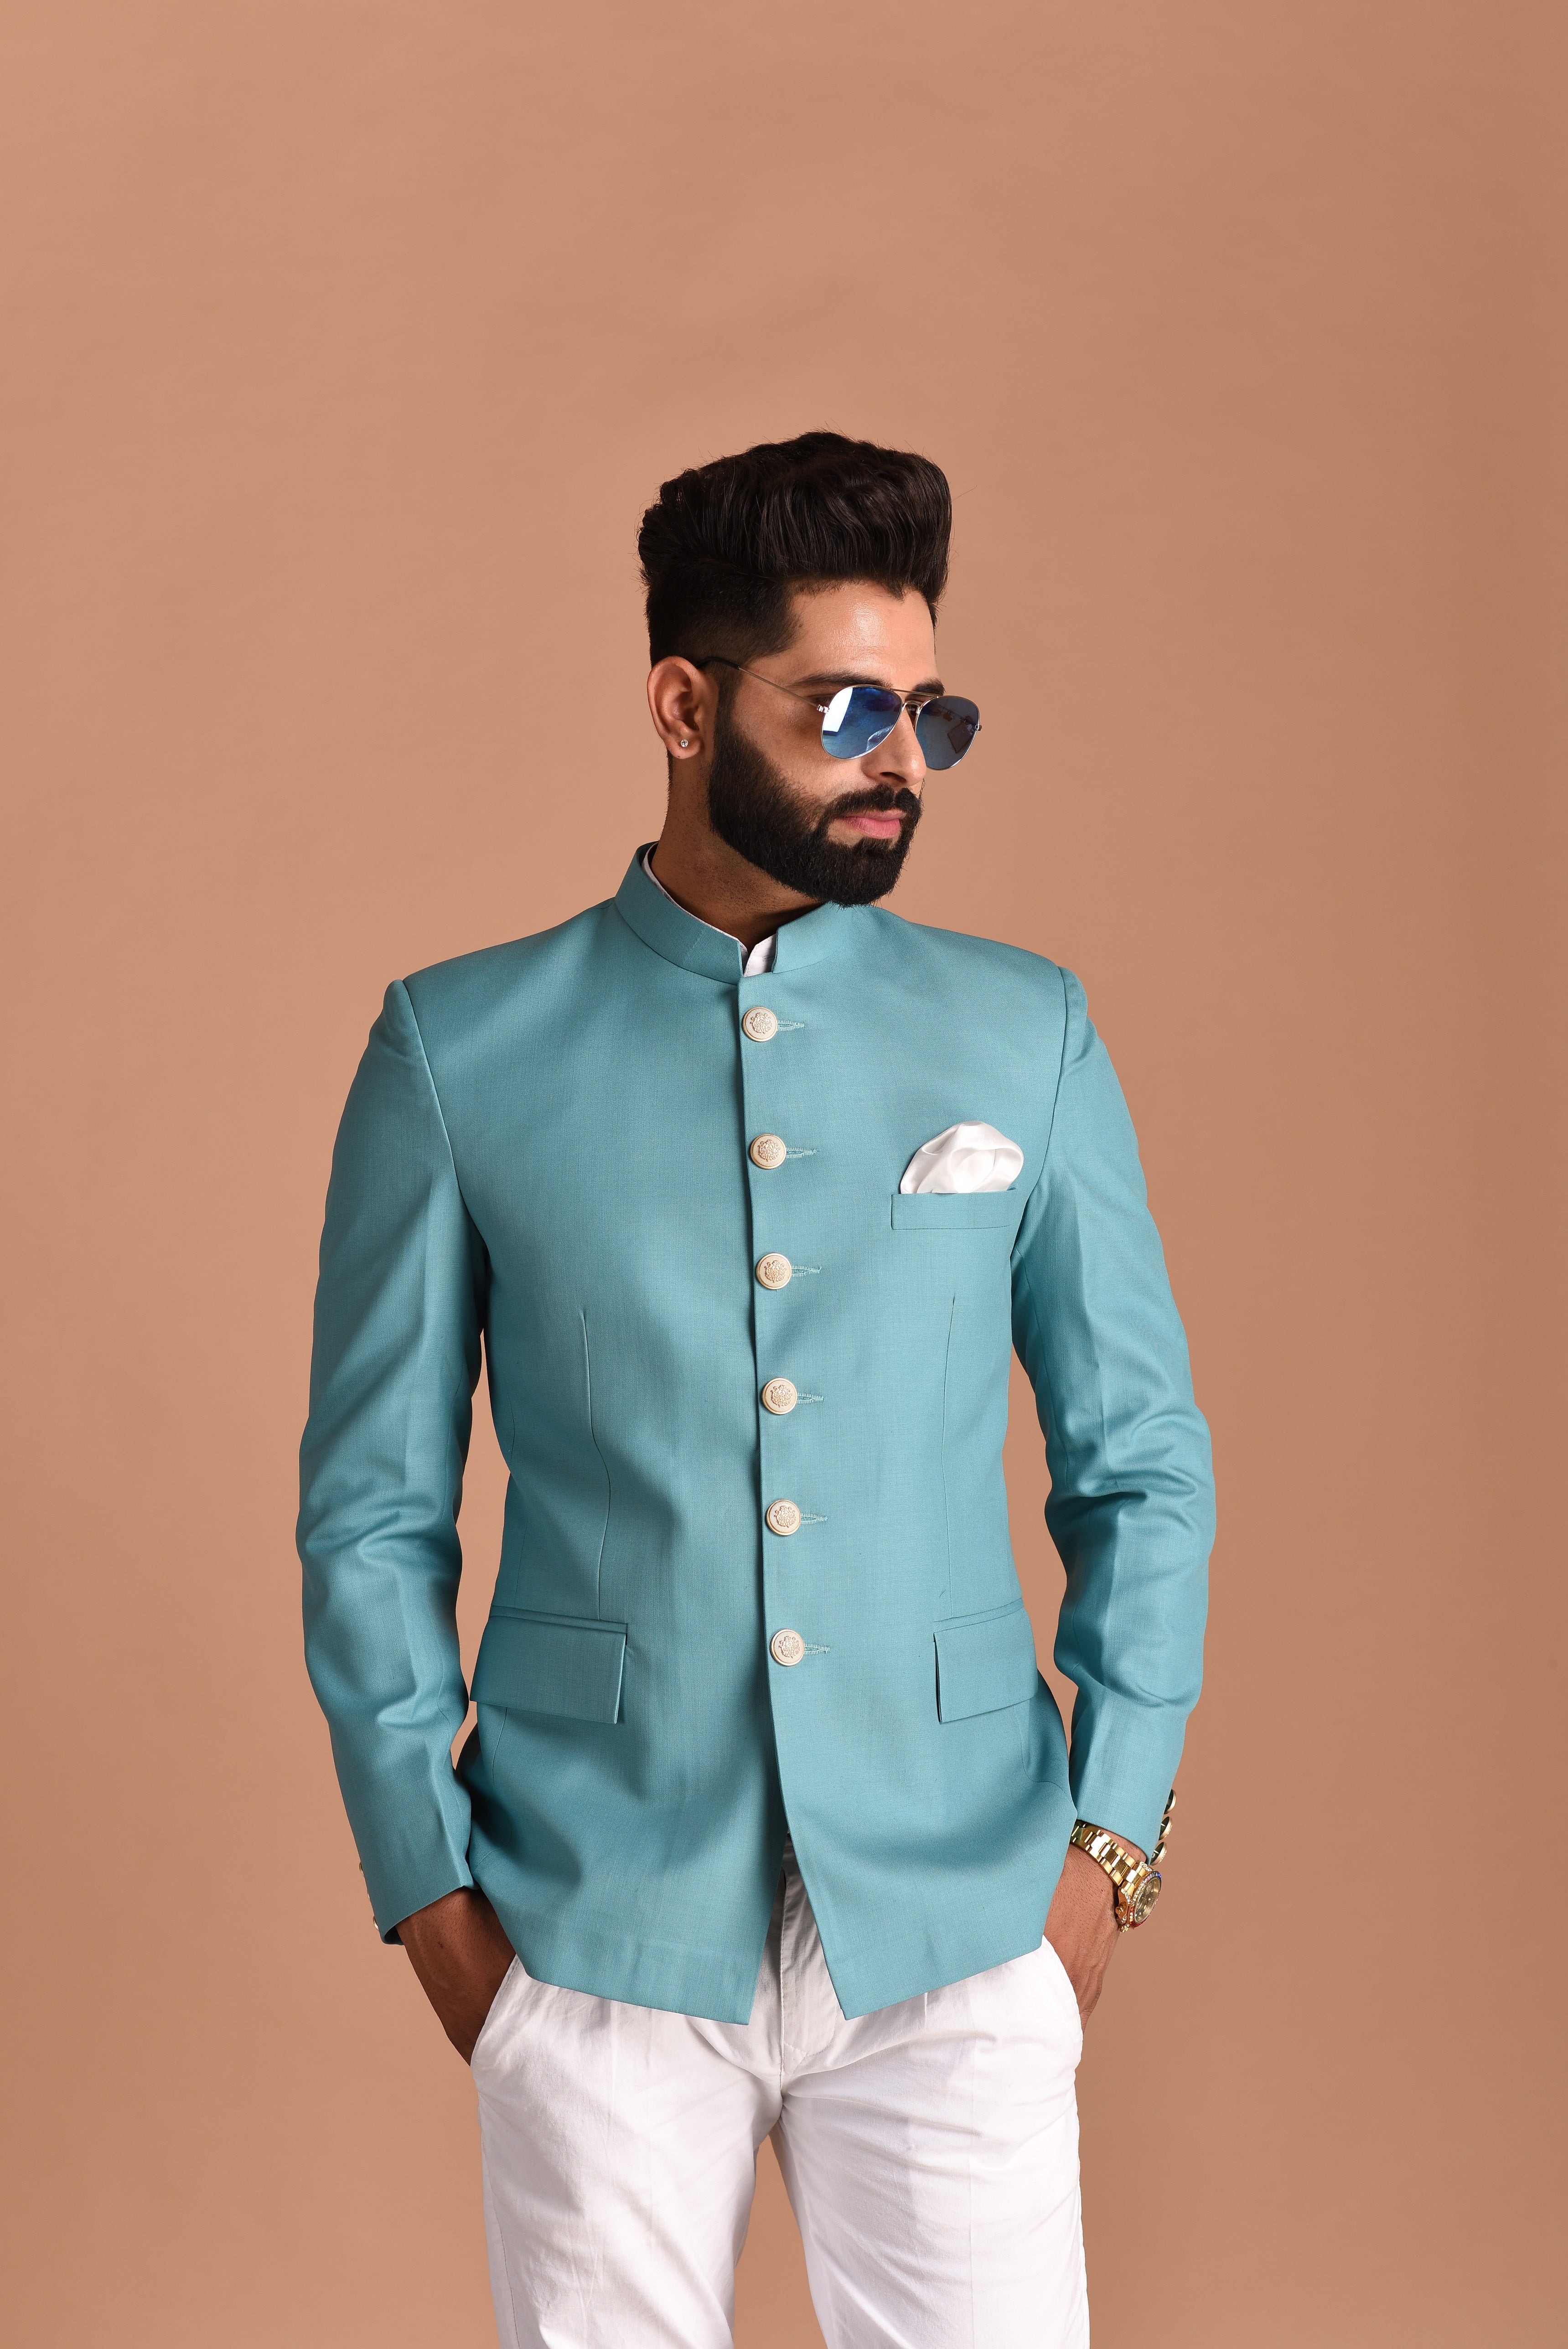 Stunning Oxy Blue  Jodhpuri Bandhgala Blazer With White Trouser | Perfect for Formal Party Wear for Open and Daylight Functions | Youth Inspired